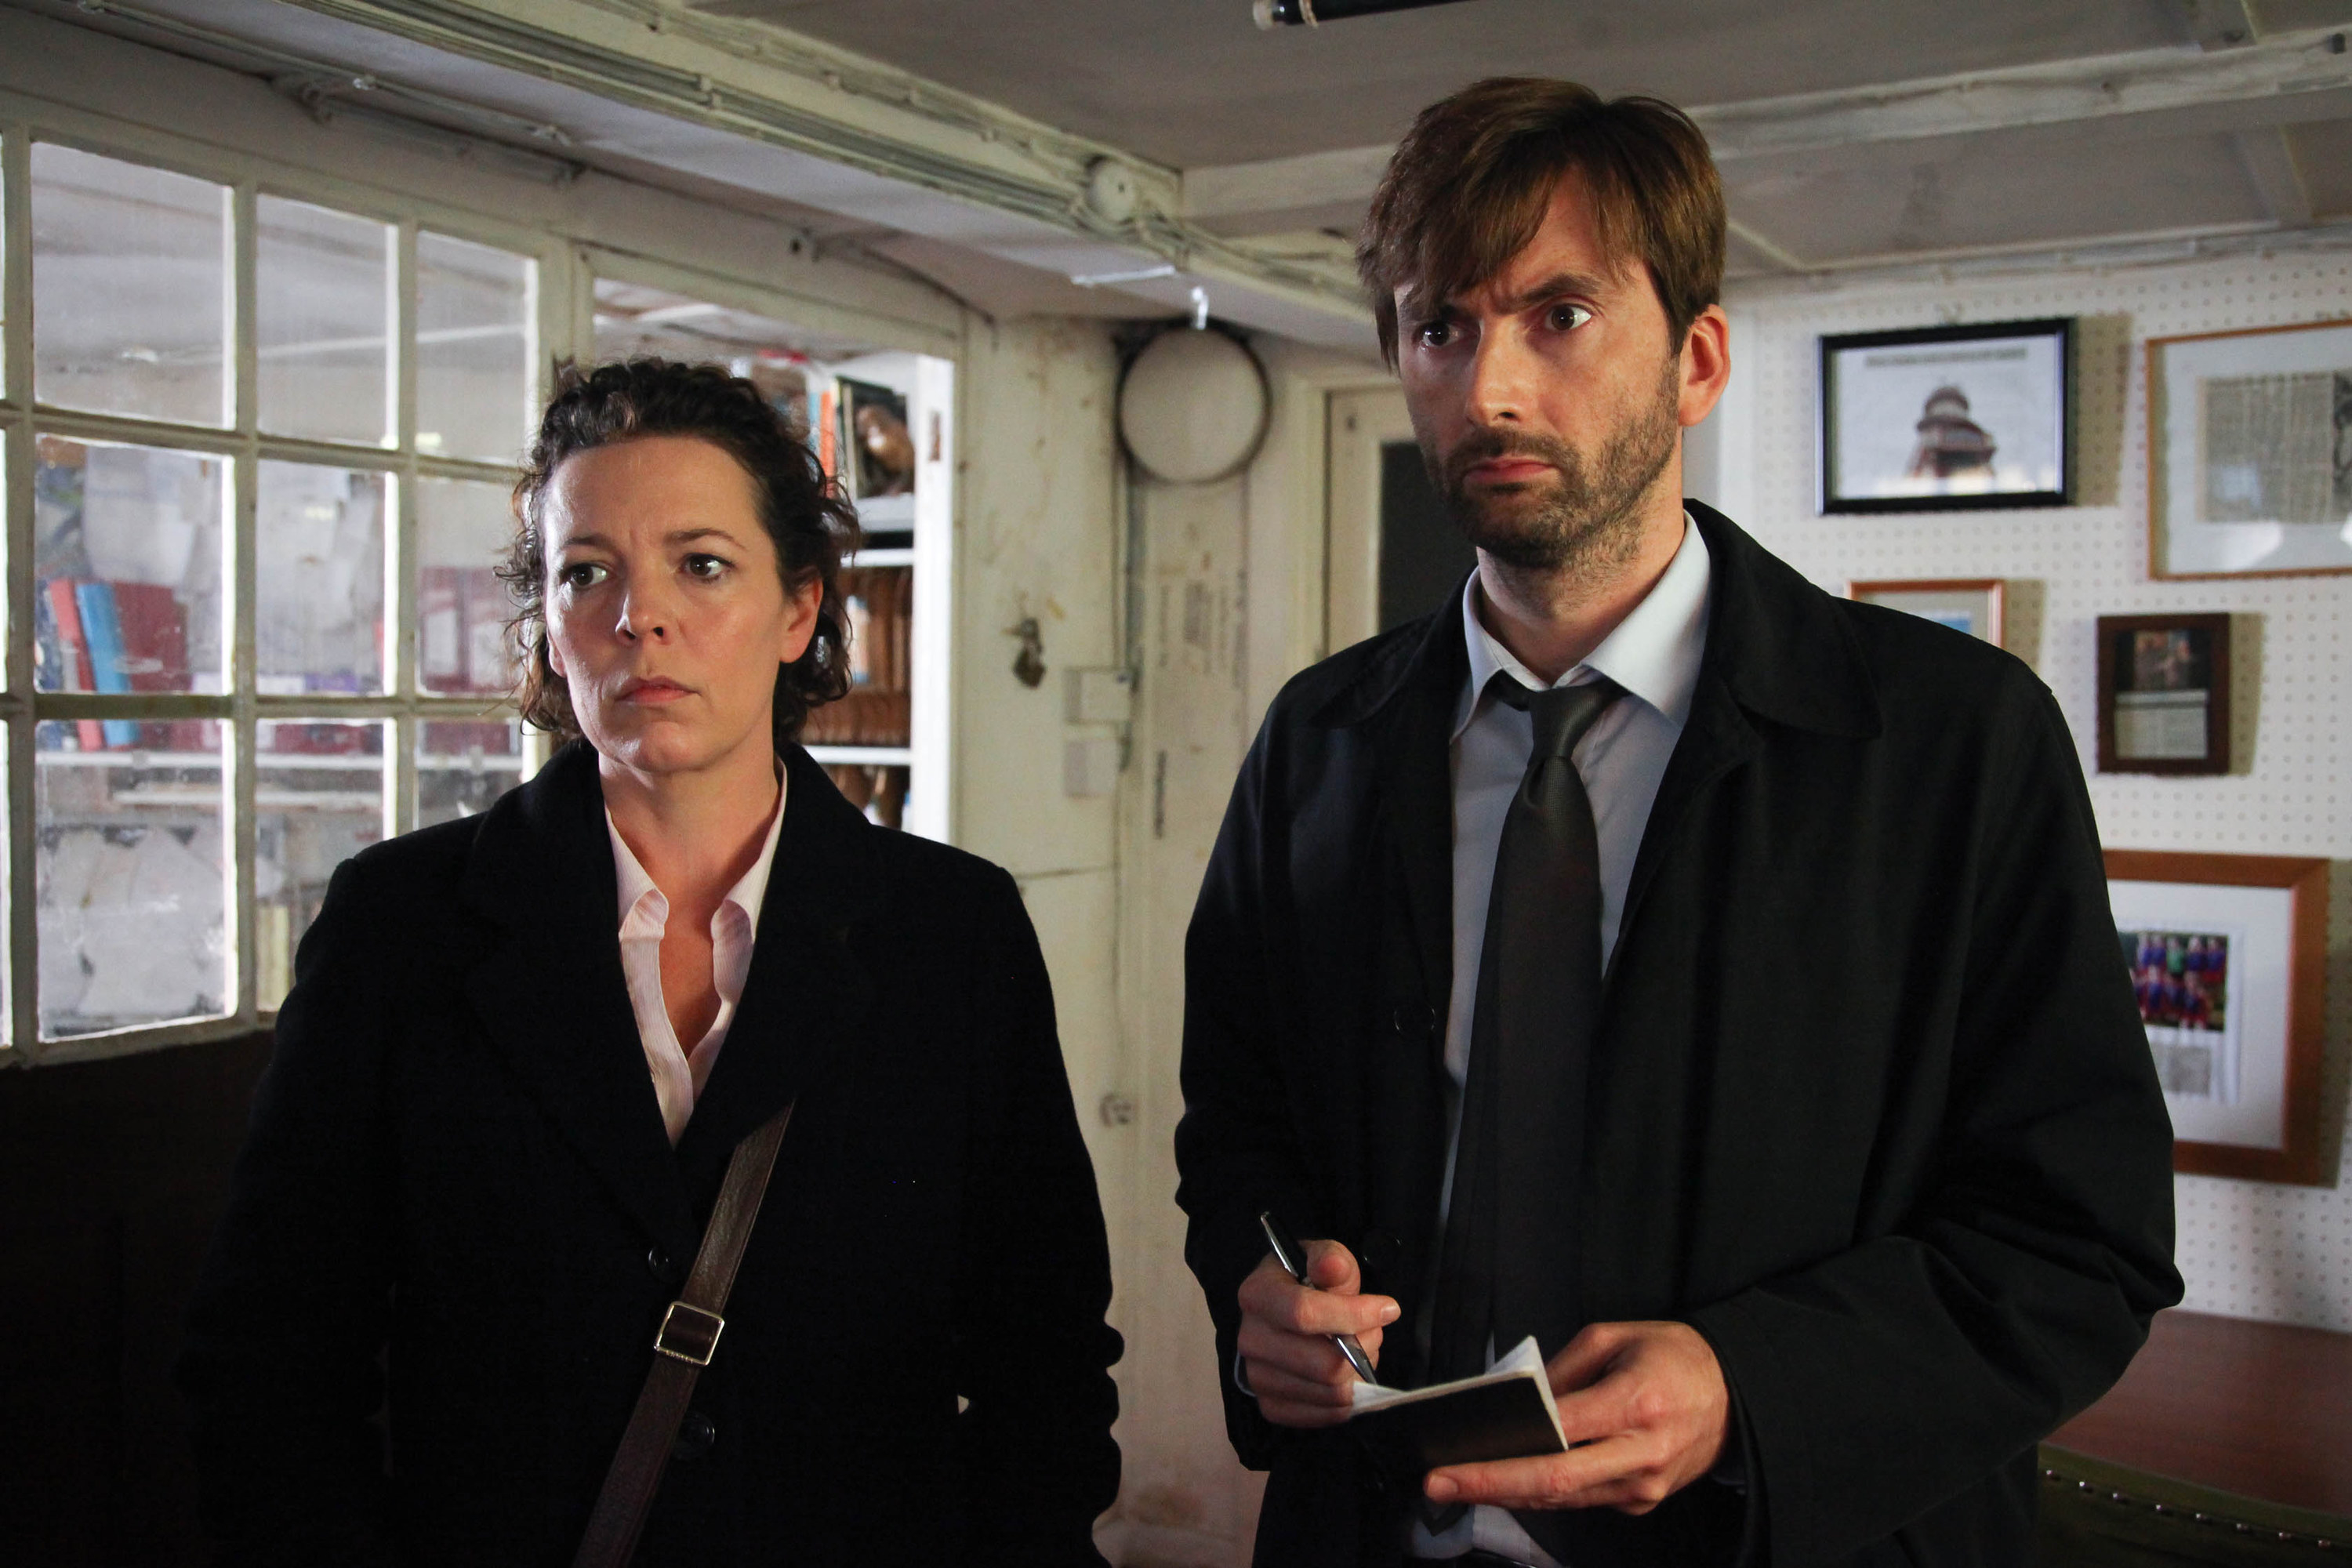 Olivia Colman and David Tennant standing next to each other.